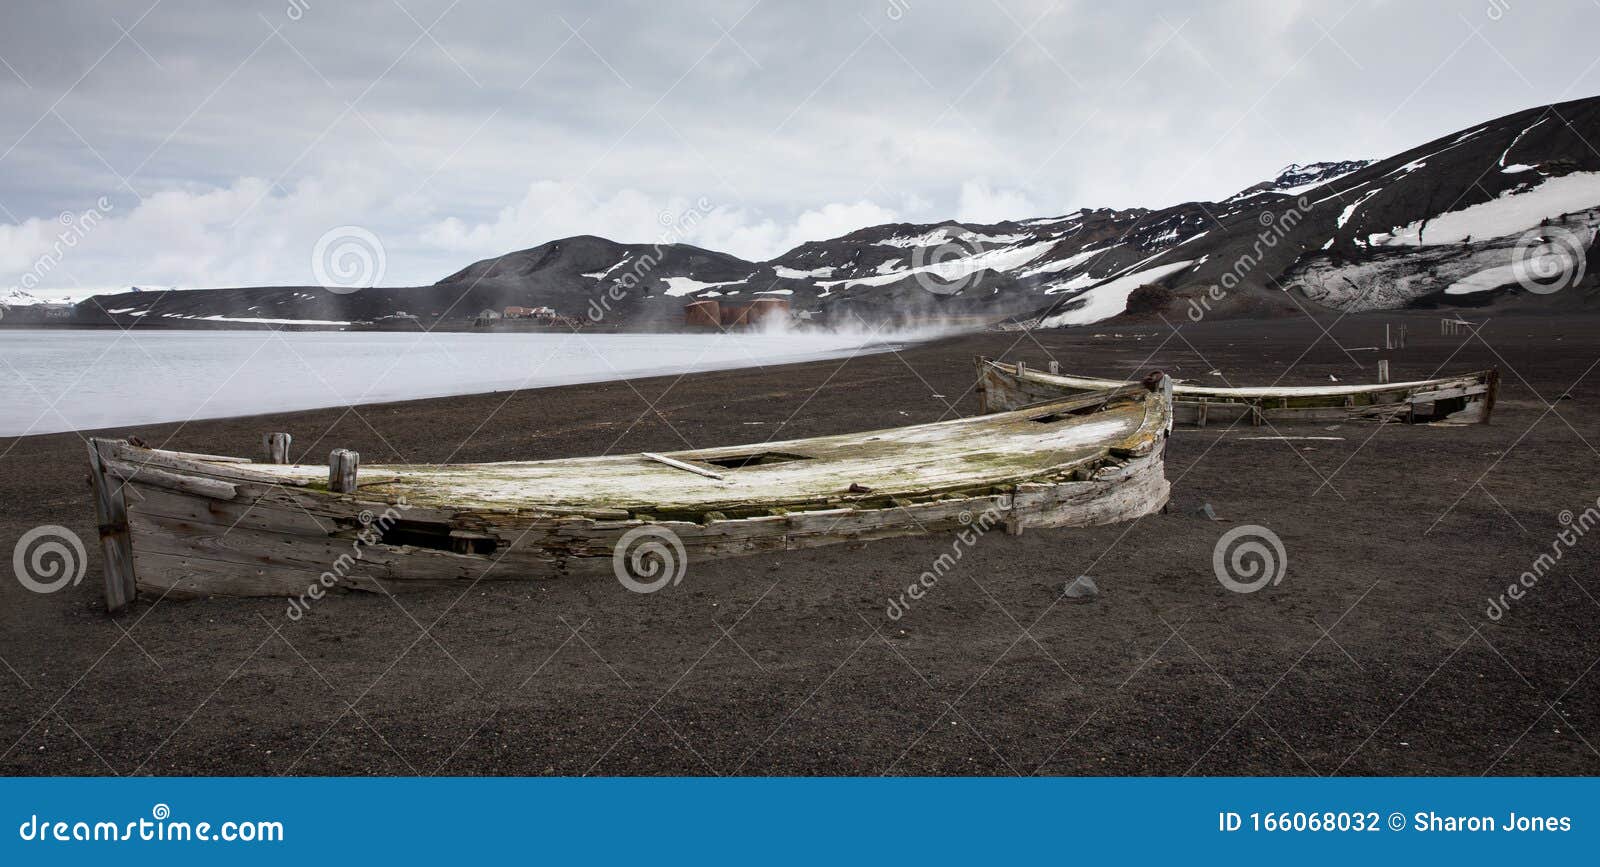 old wooden whaling boats on the beach at whaler`s bay, antarctica